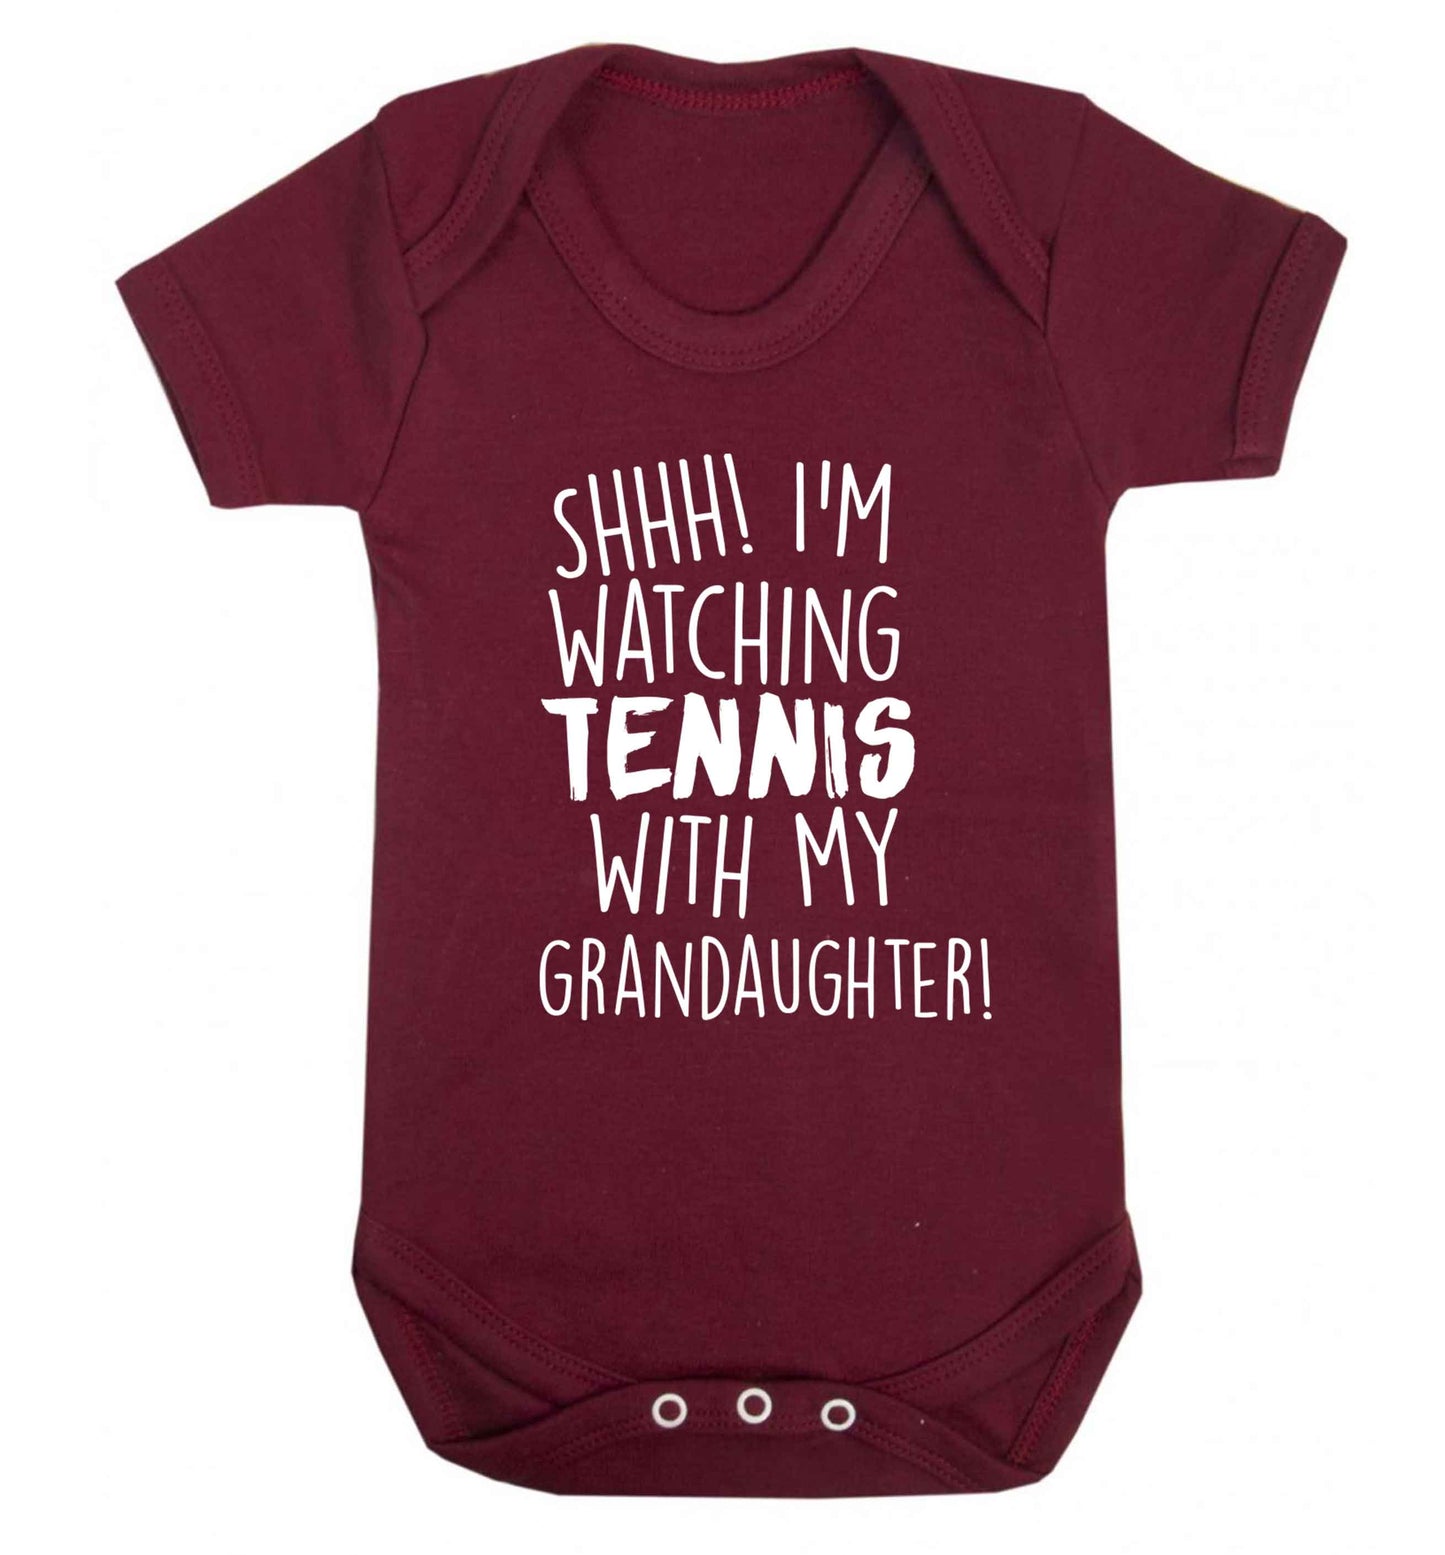 Shh! I'm watching tennis with my granddaughter! Baby Vest maroon 18-24 months